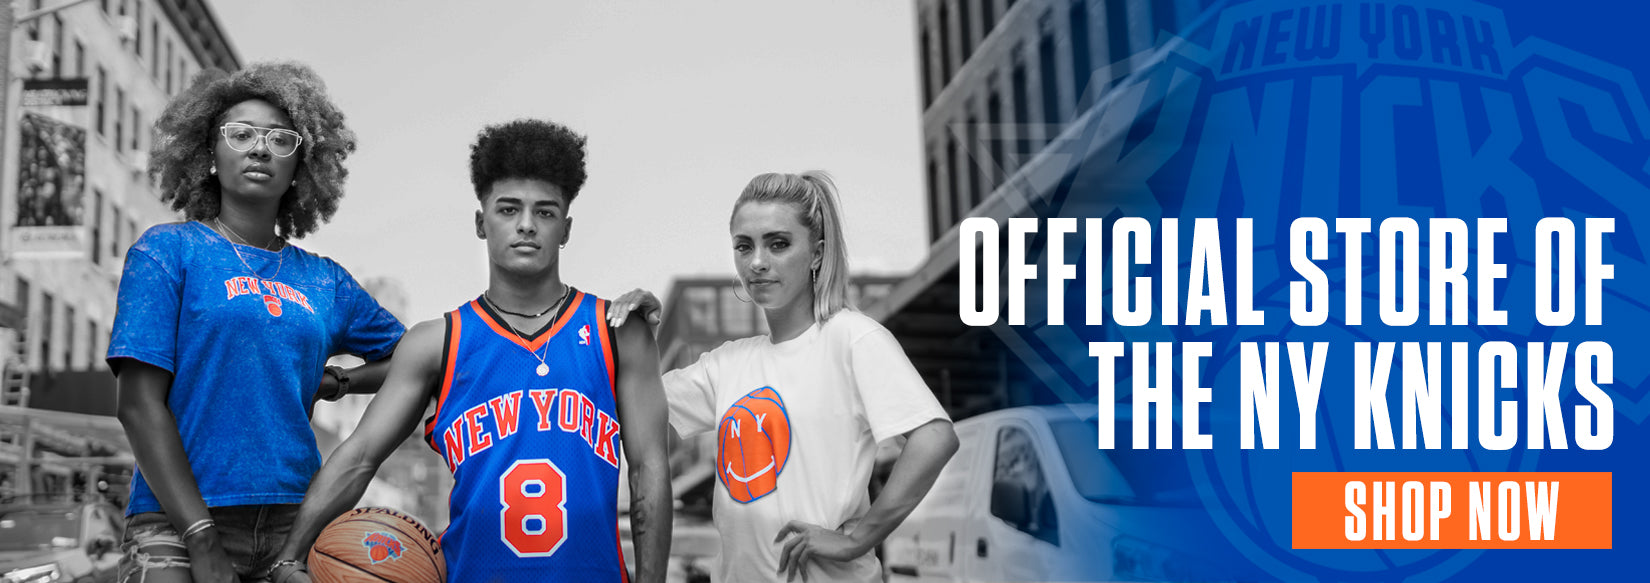 Official Store of the NY Knicks SHOP NOW